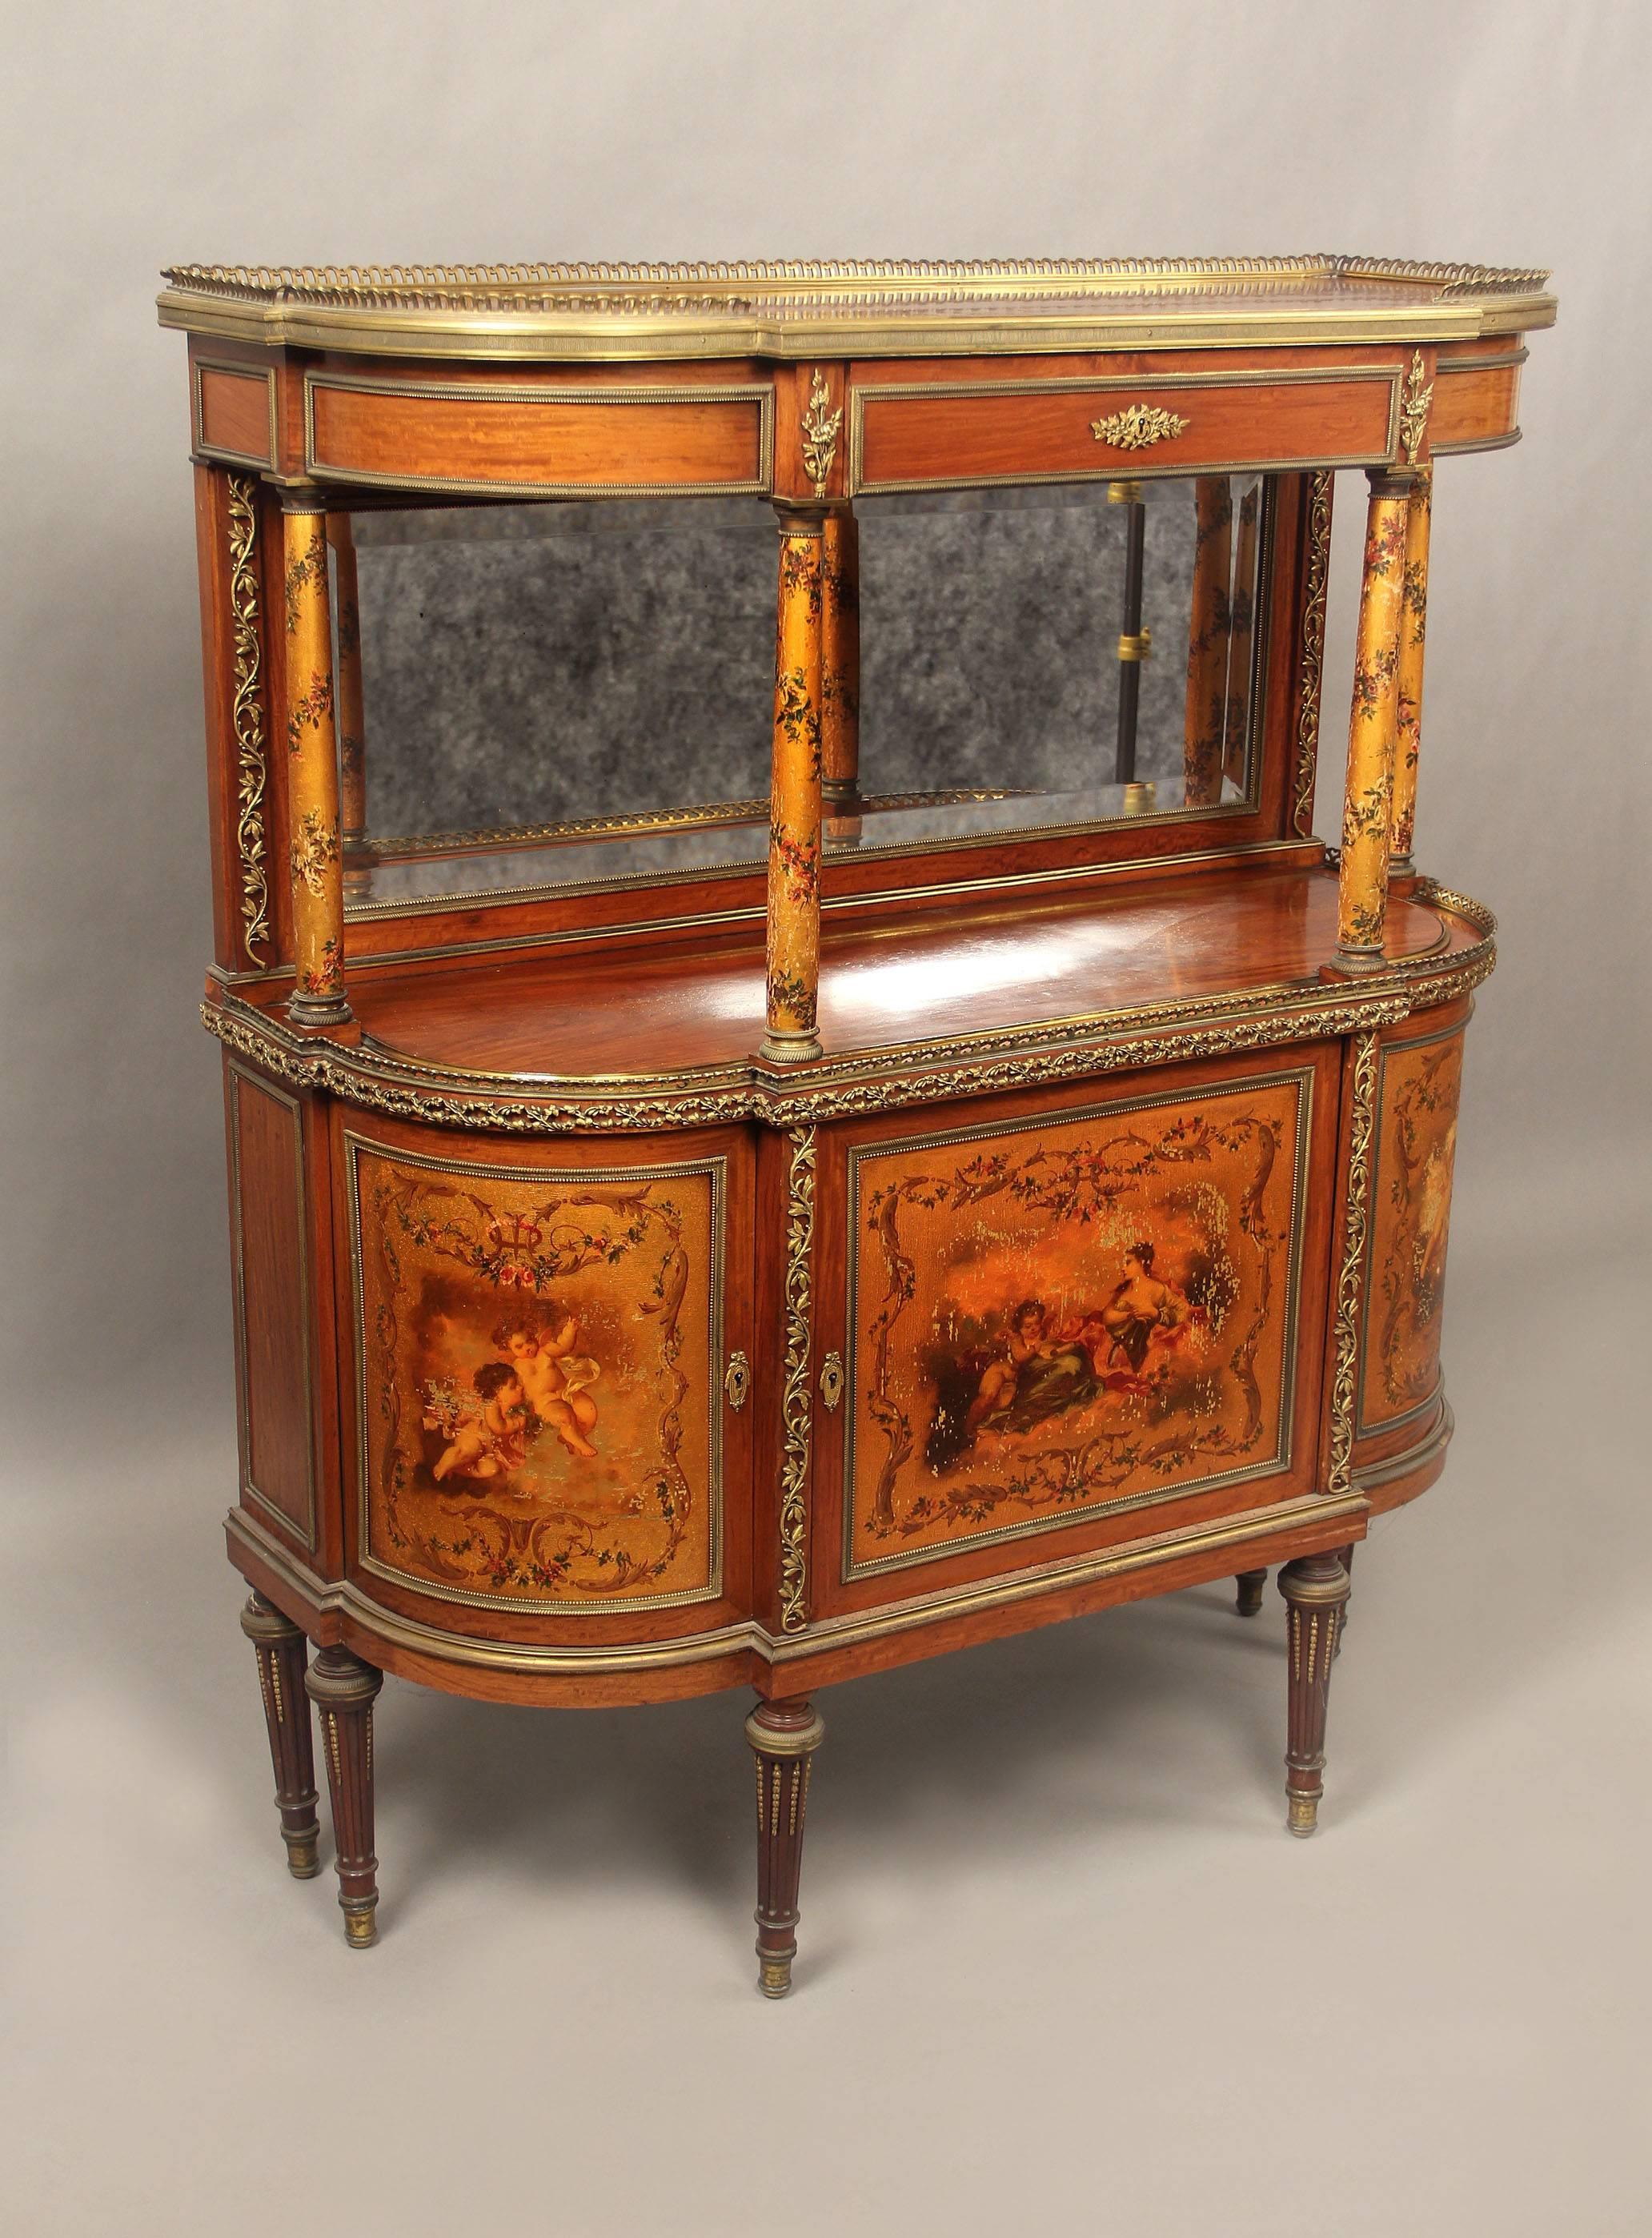 A lovely late 19th century gilt bronze-mounted English cabinet / server

By Hampton & Sons

A bronze gallery above a single drawer and four gilt and painted columns, with a mirrored back over three gilt and figural-painted doors with shelved